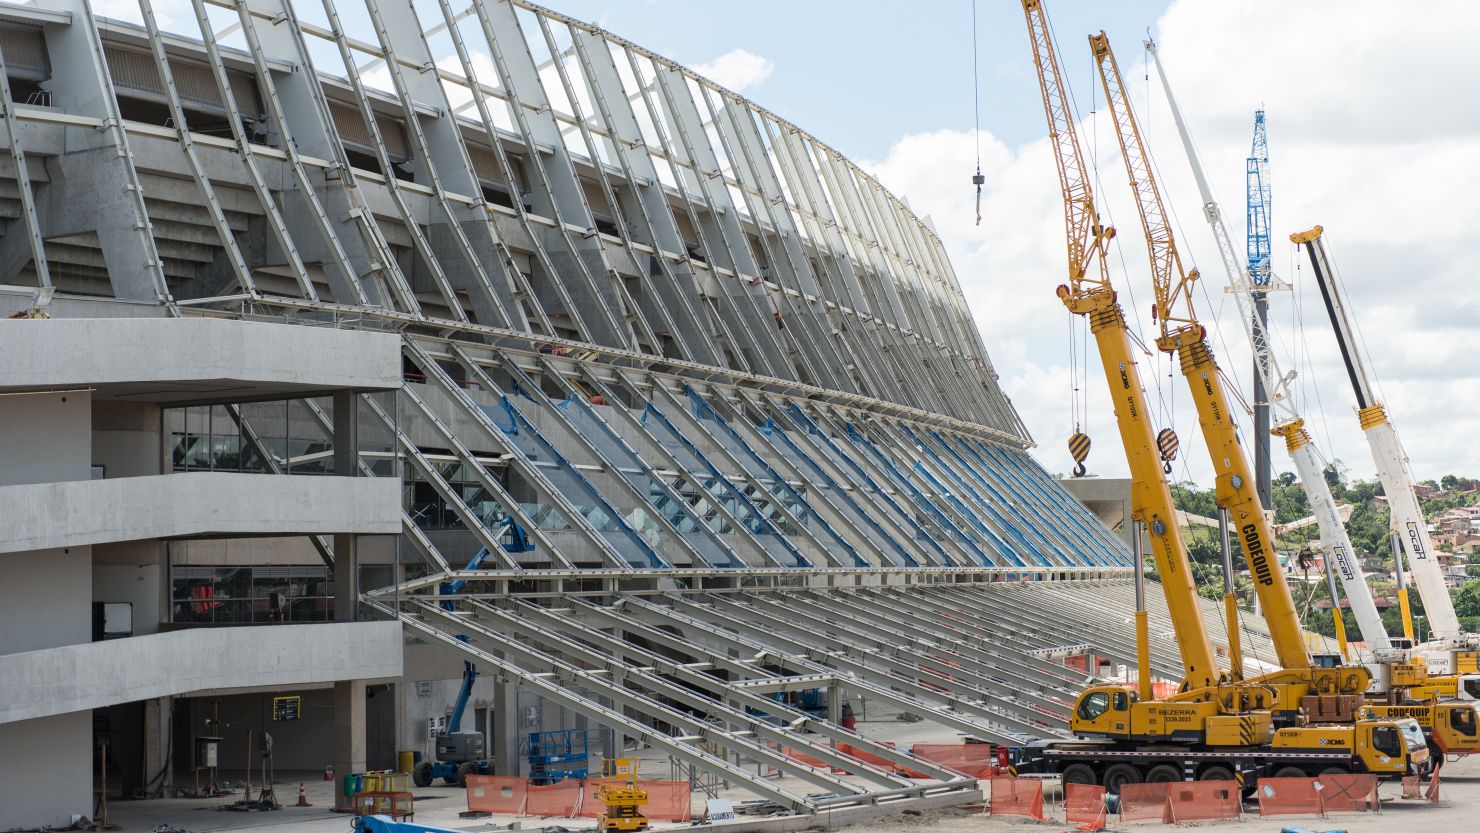 The rush to open Recife's stadium ahead of FIFA's deadline is revealed by the cranes outside the Arena Pernambuco on Sunday